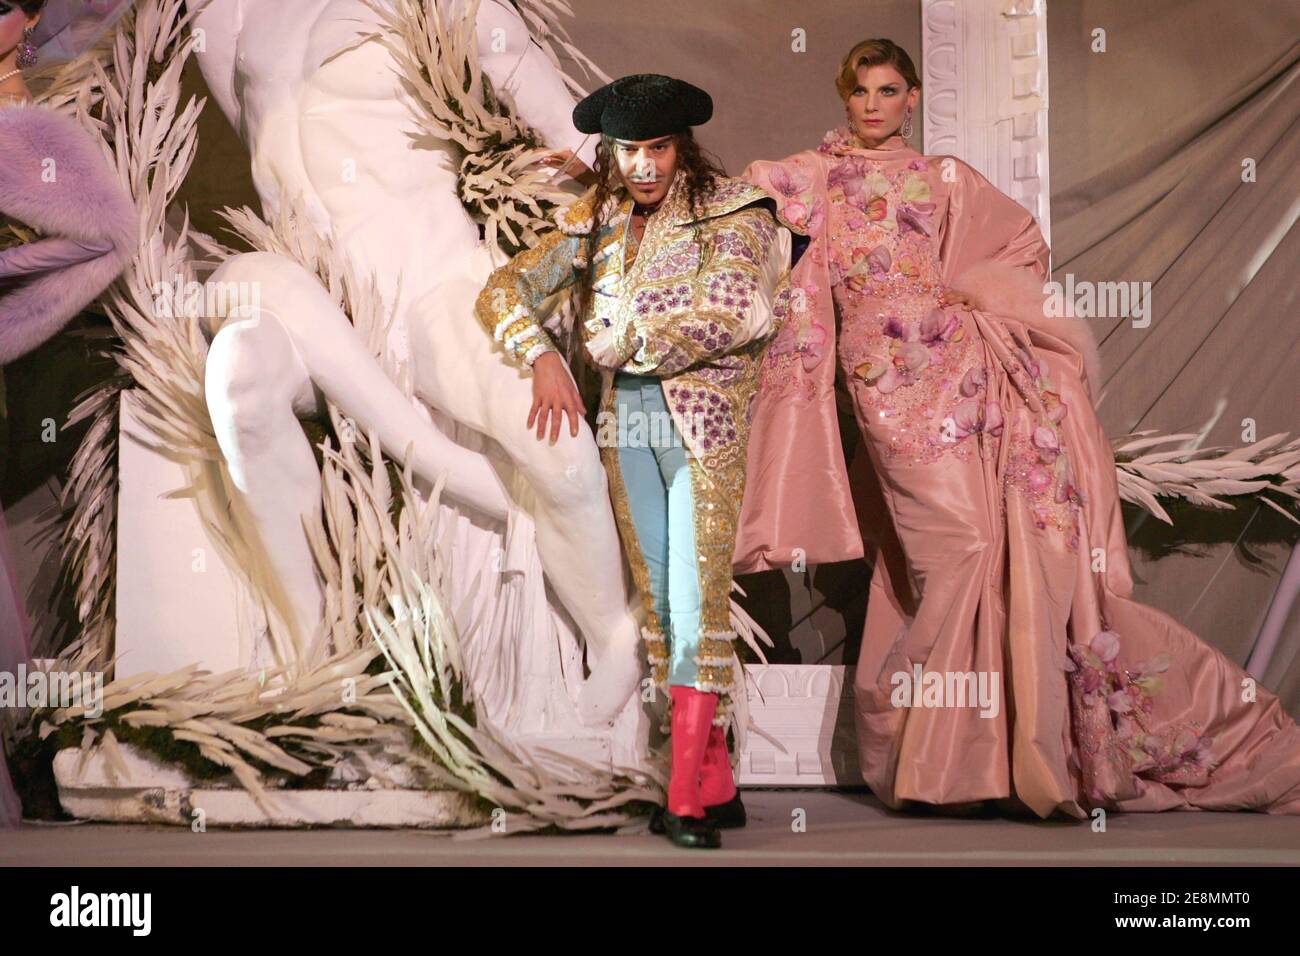 British designer John Galliano poses with a model at the end of